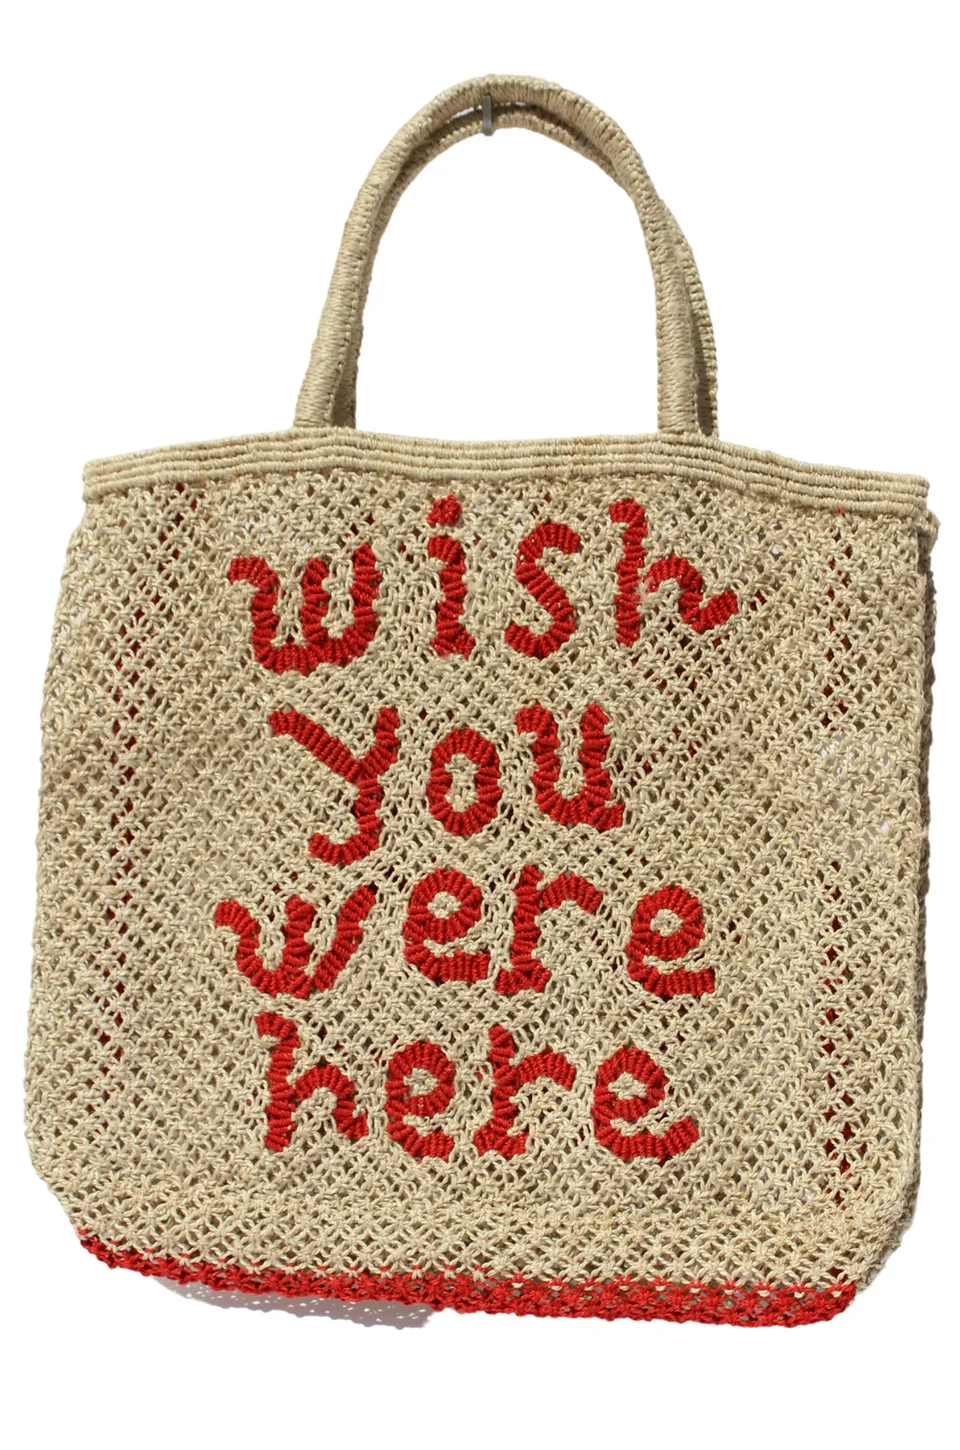 The Jacksons Wish You Were Here Tote